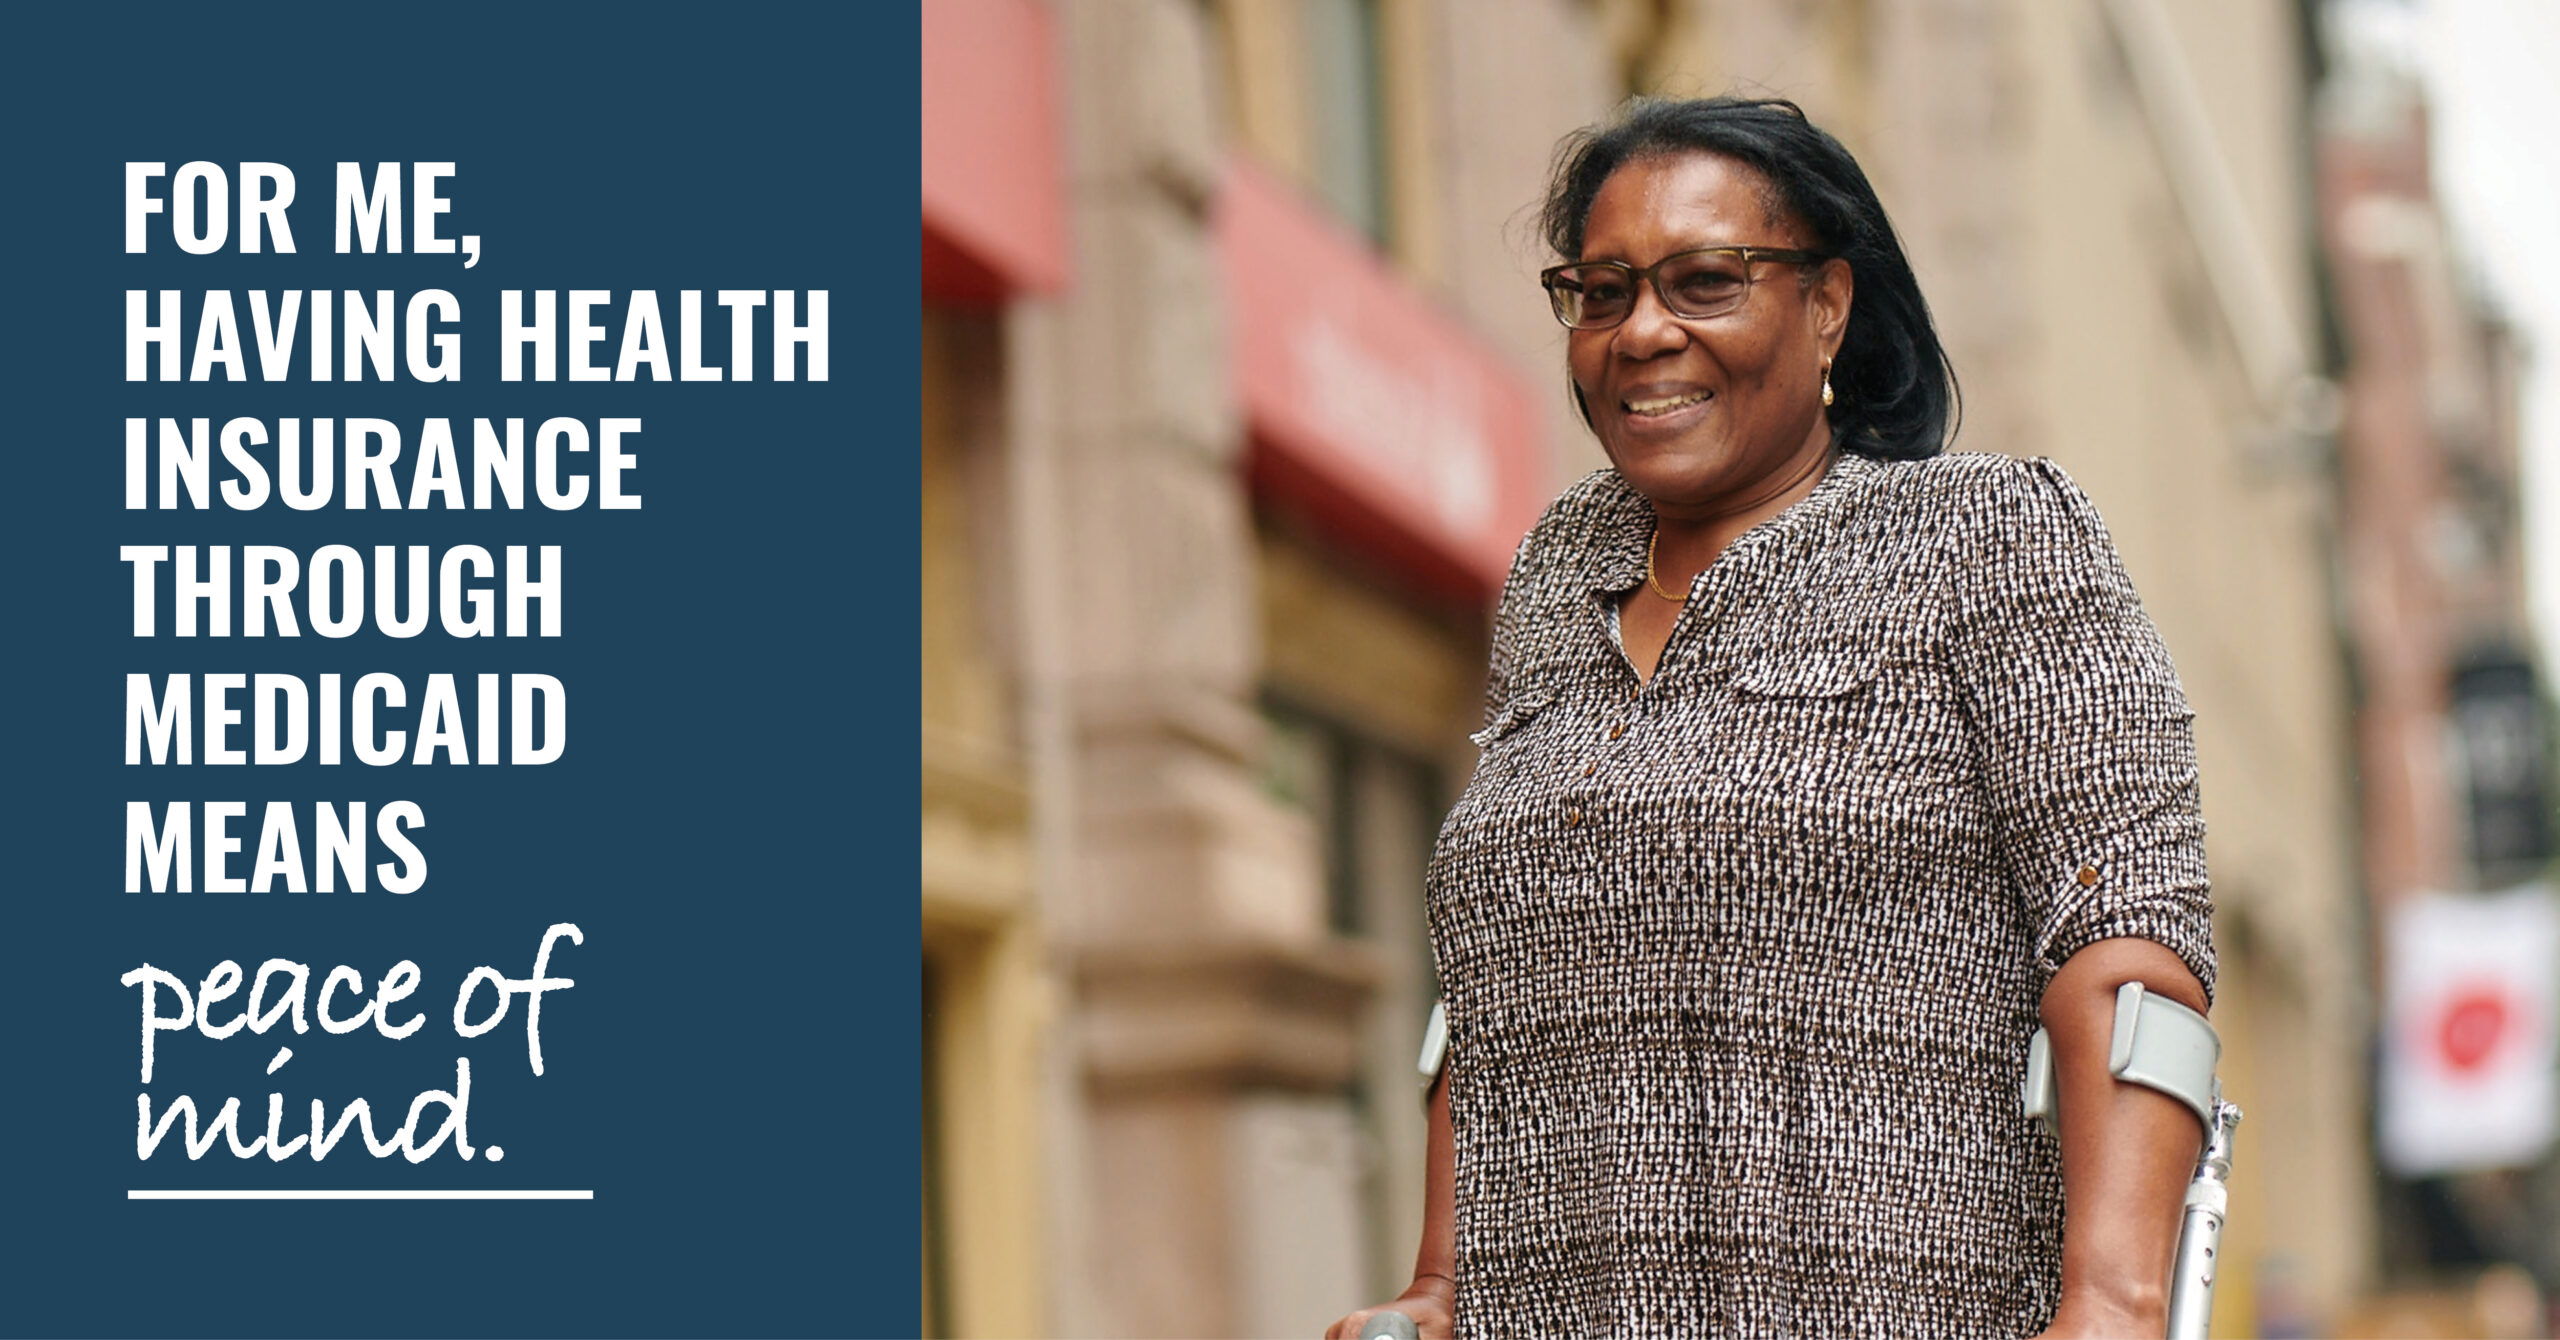 Image of an African-American woman with forearm crutches on both arms and the message “for me, having health insurance through Medicaid means peace of mind.”